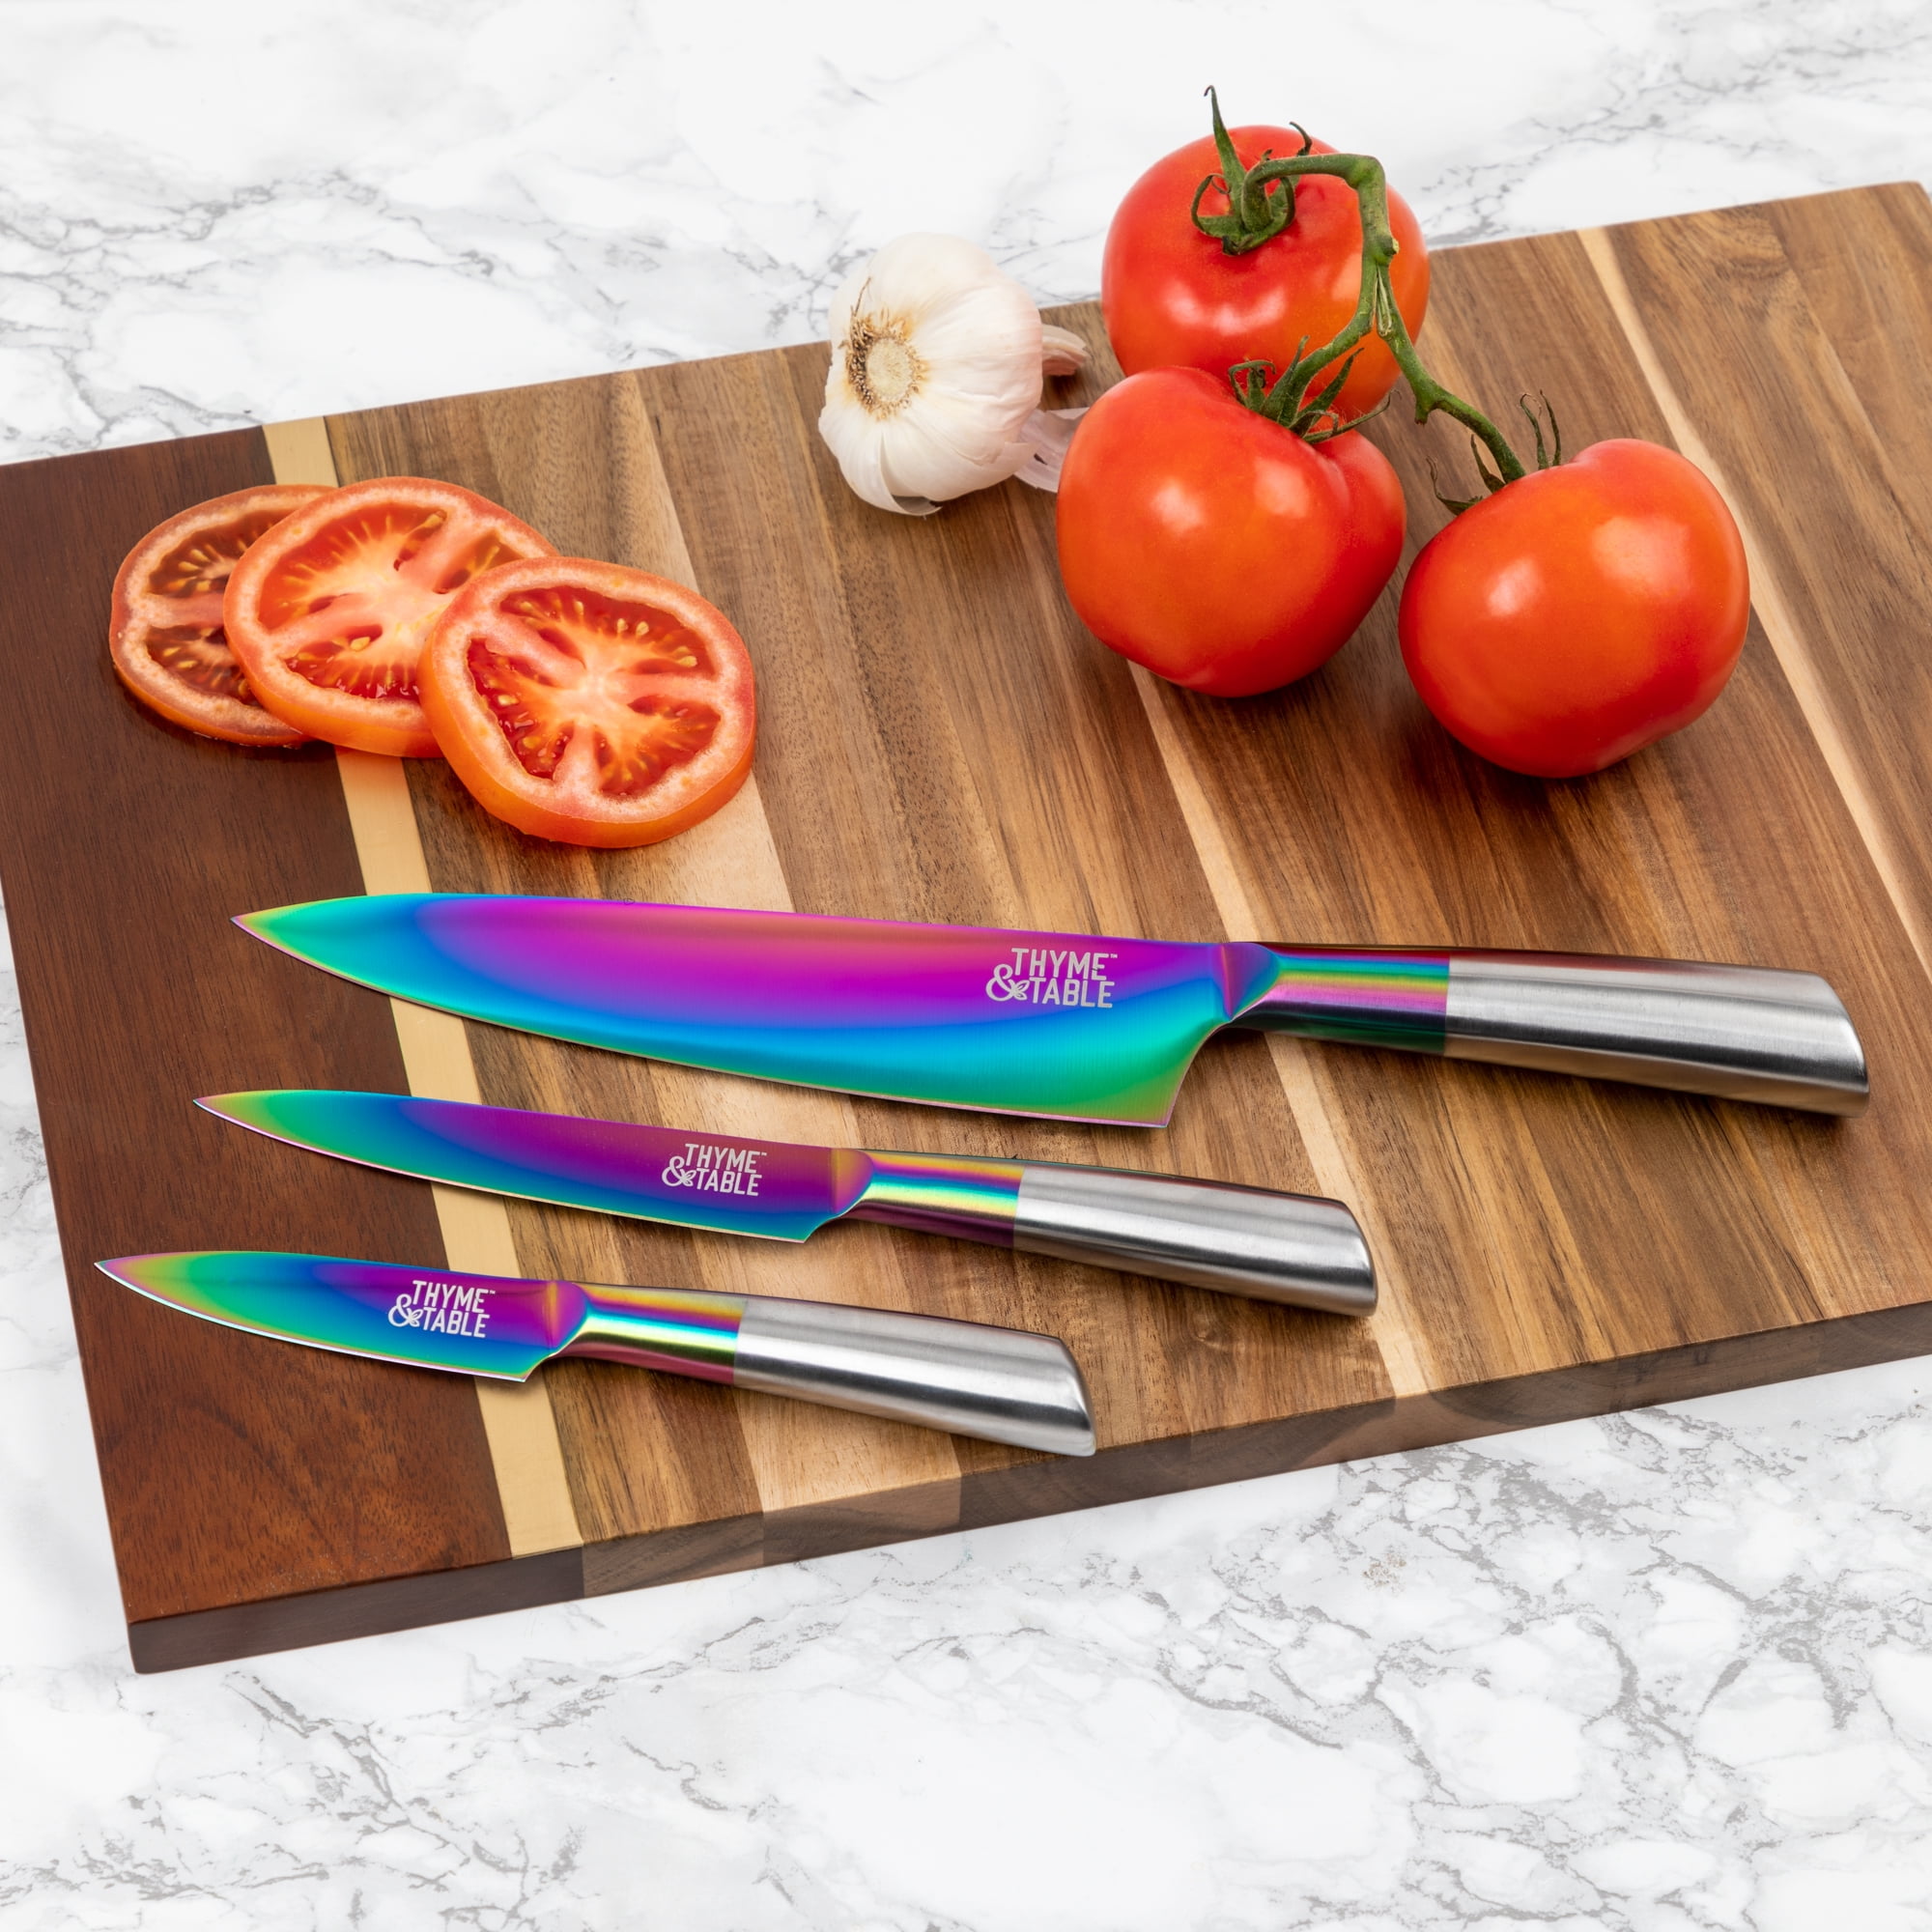 Thyme & Table Non-Stick Coated High Carbon Stainless Titanium Rainbow  Knives, 3 Piece Set